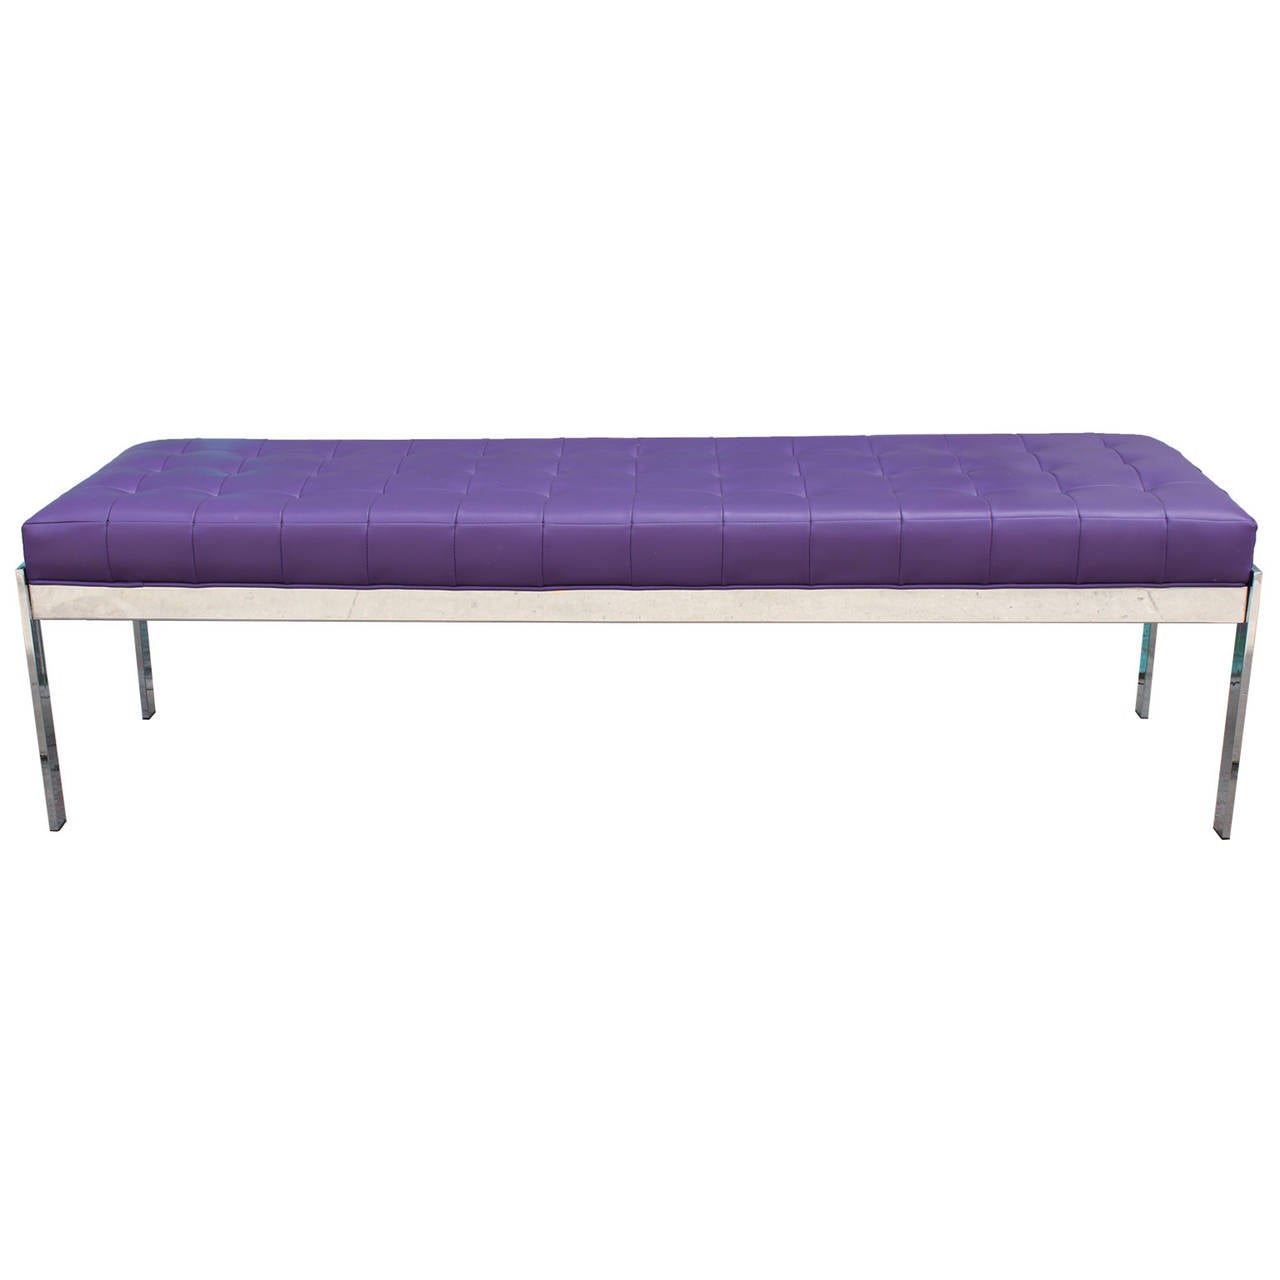 Luxe bench upholstered in original purple Naugahyde with a chrome base. Seat is box tufted. Well built - In the style of Zographos, Knoll, Milo Baughman.